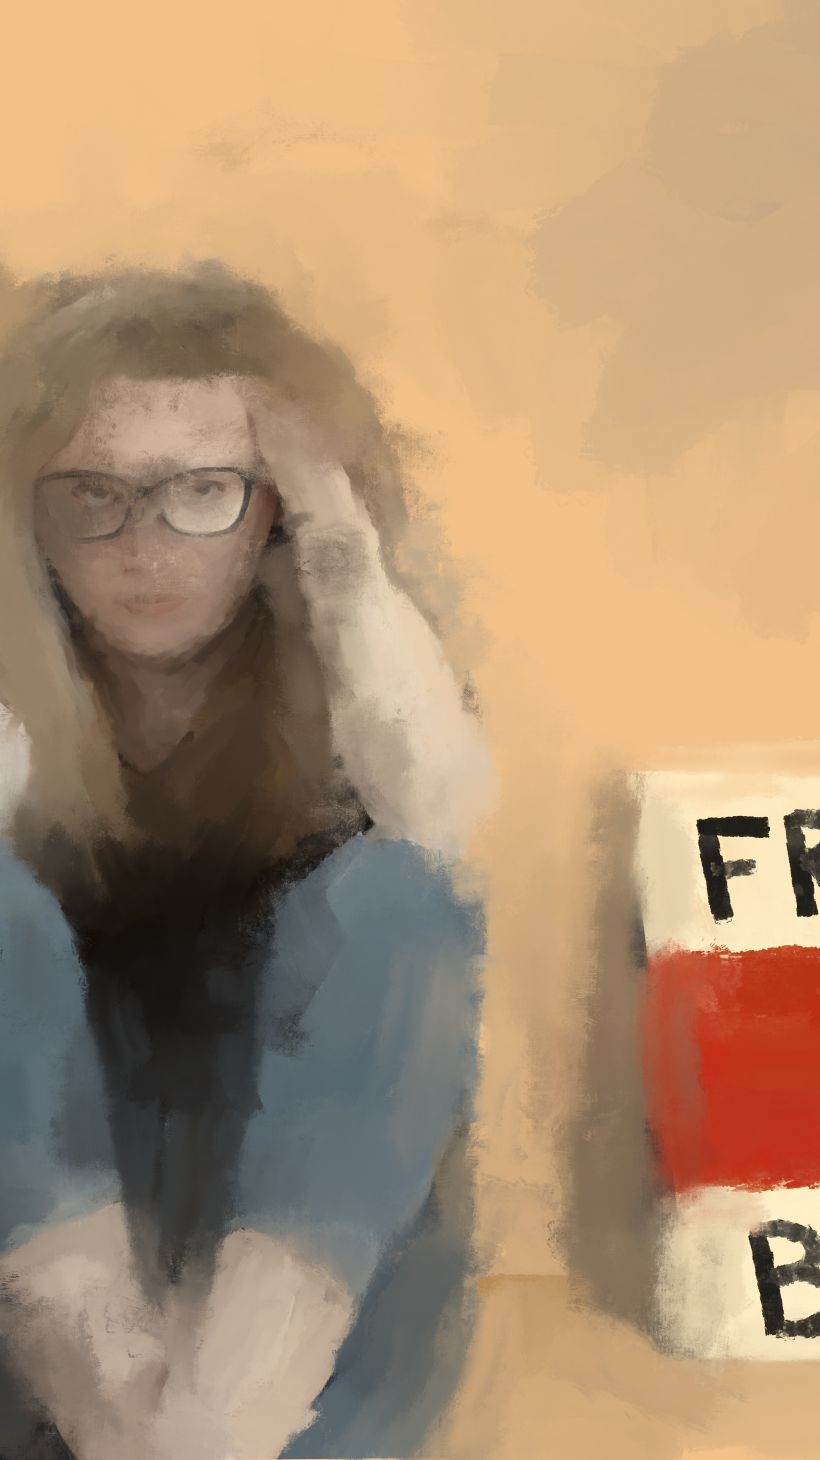 An illustration of a girl with glasses wearing jeans holding sitting and holding her head with a sign next to her saying, "Freedom Belarus"